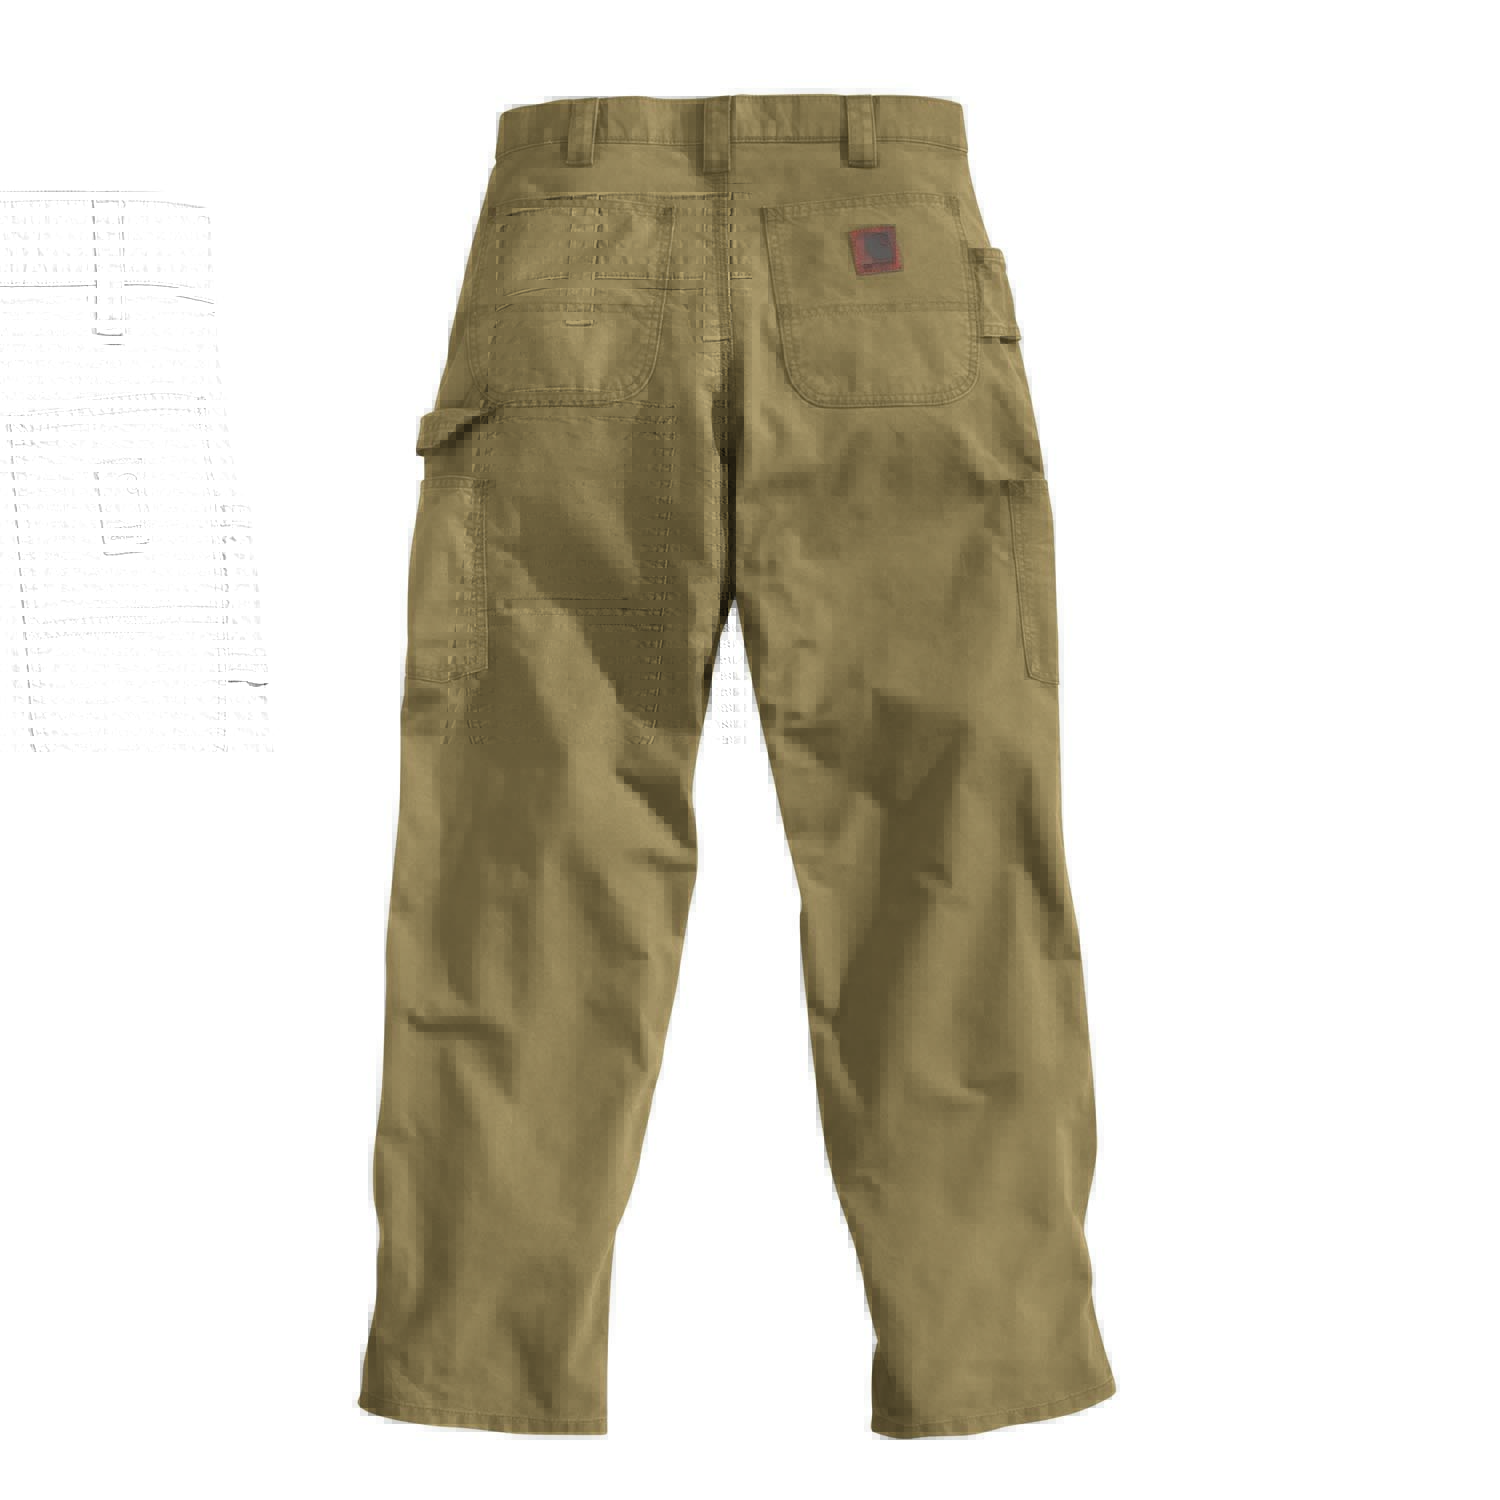 CARHARTT LOOSE FIT CANVAS UTILITY WORK PANTS